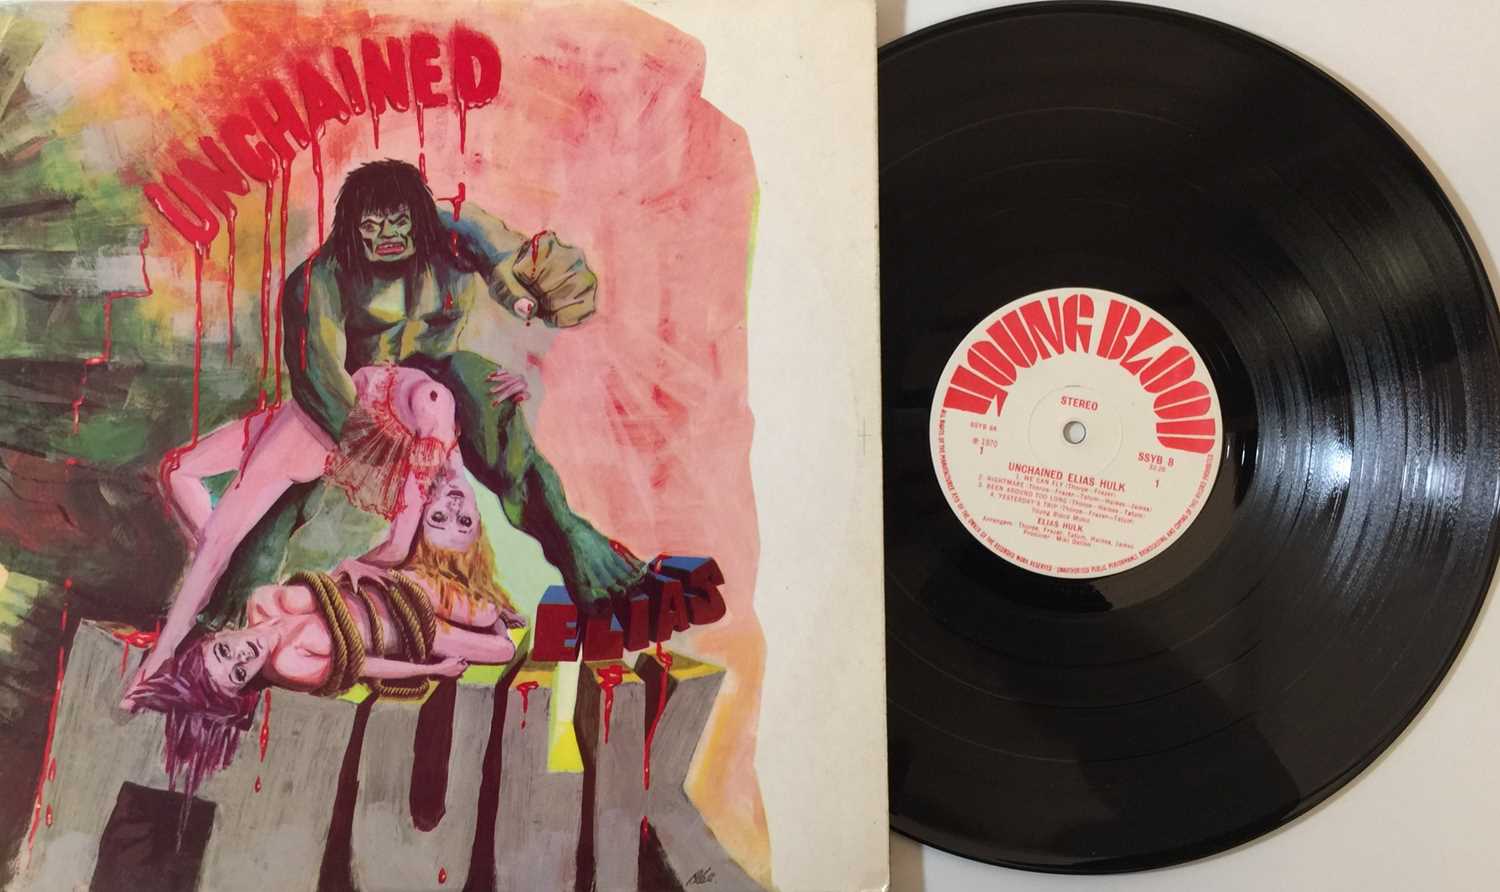 Lot 30 - ELIAS HULK - UNCHAINED LP (ORIGINAL UK PRESSING - YOUNG BLOOD SSYB 8)